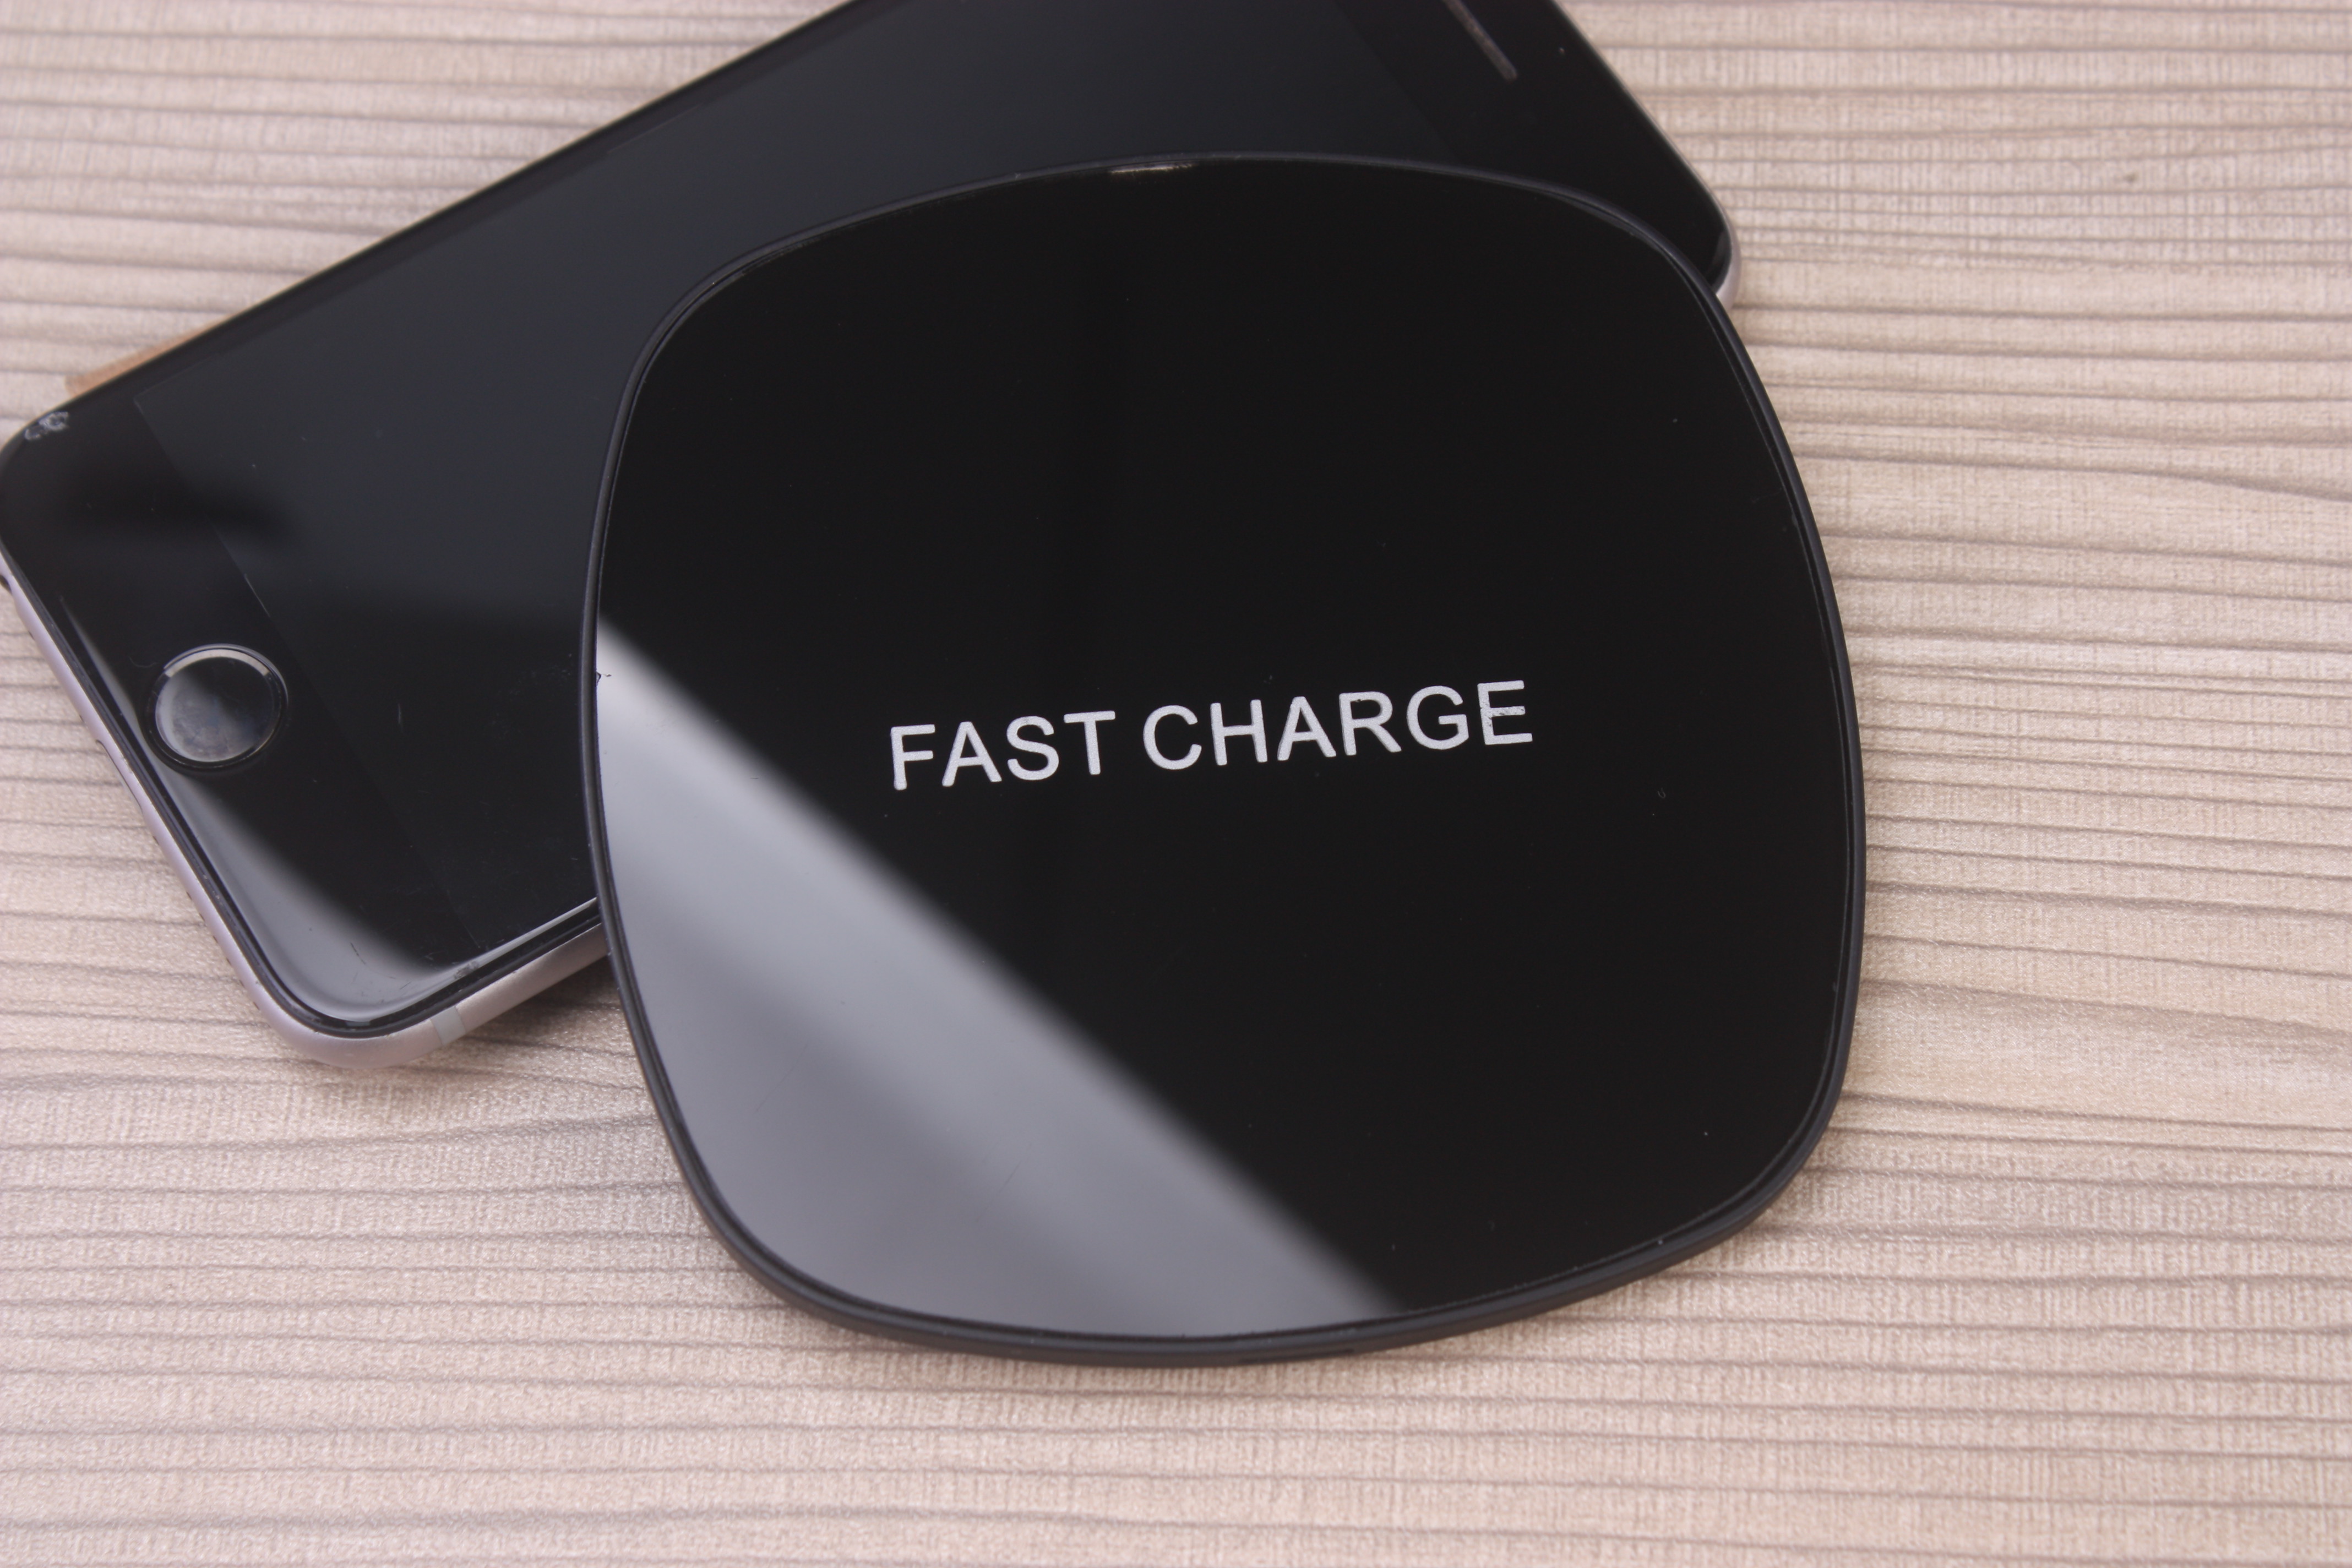 Branded Wireless Qi charger pad